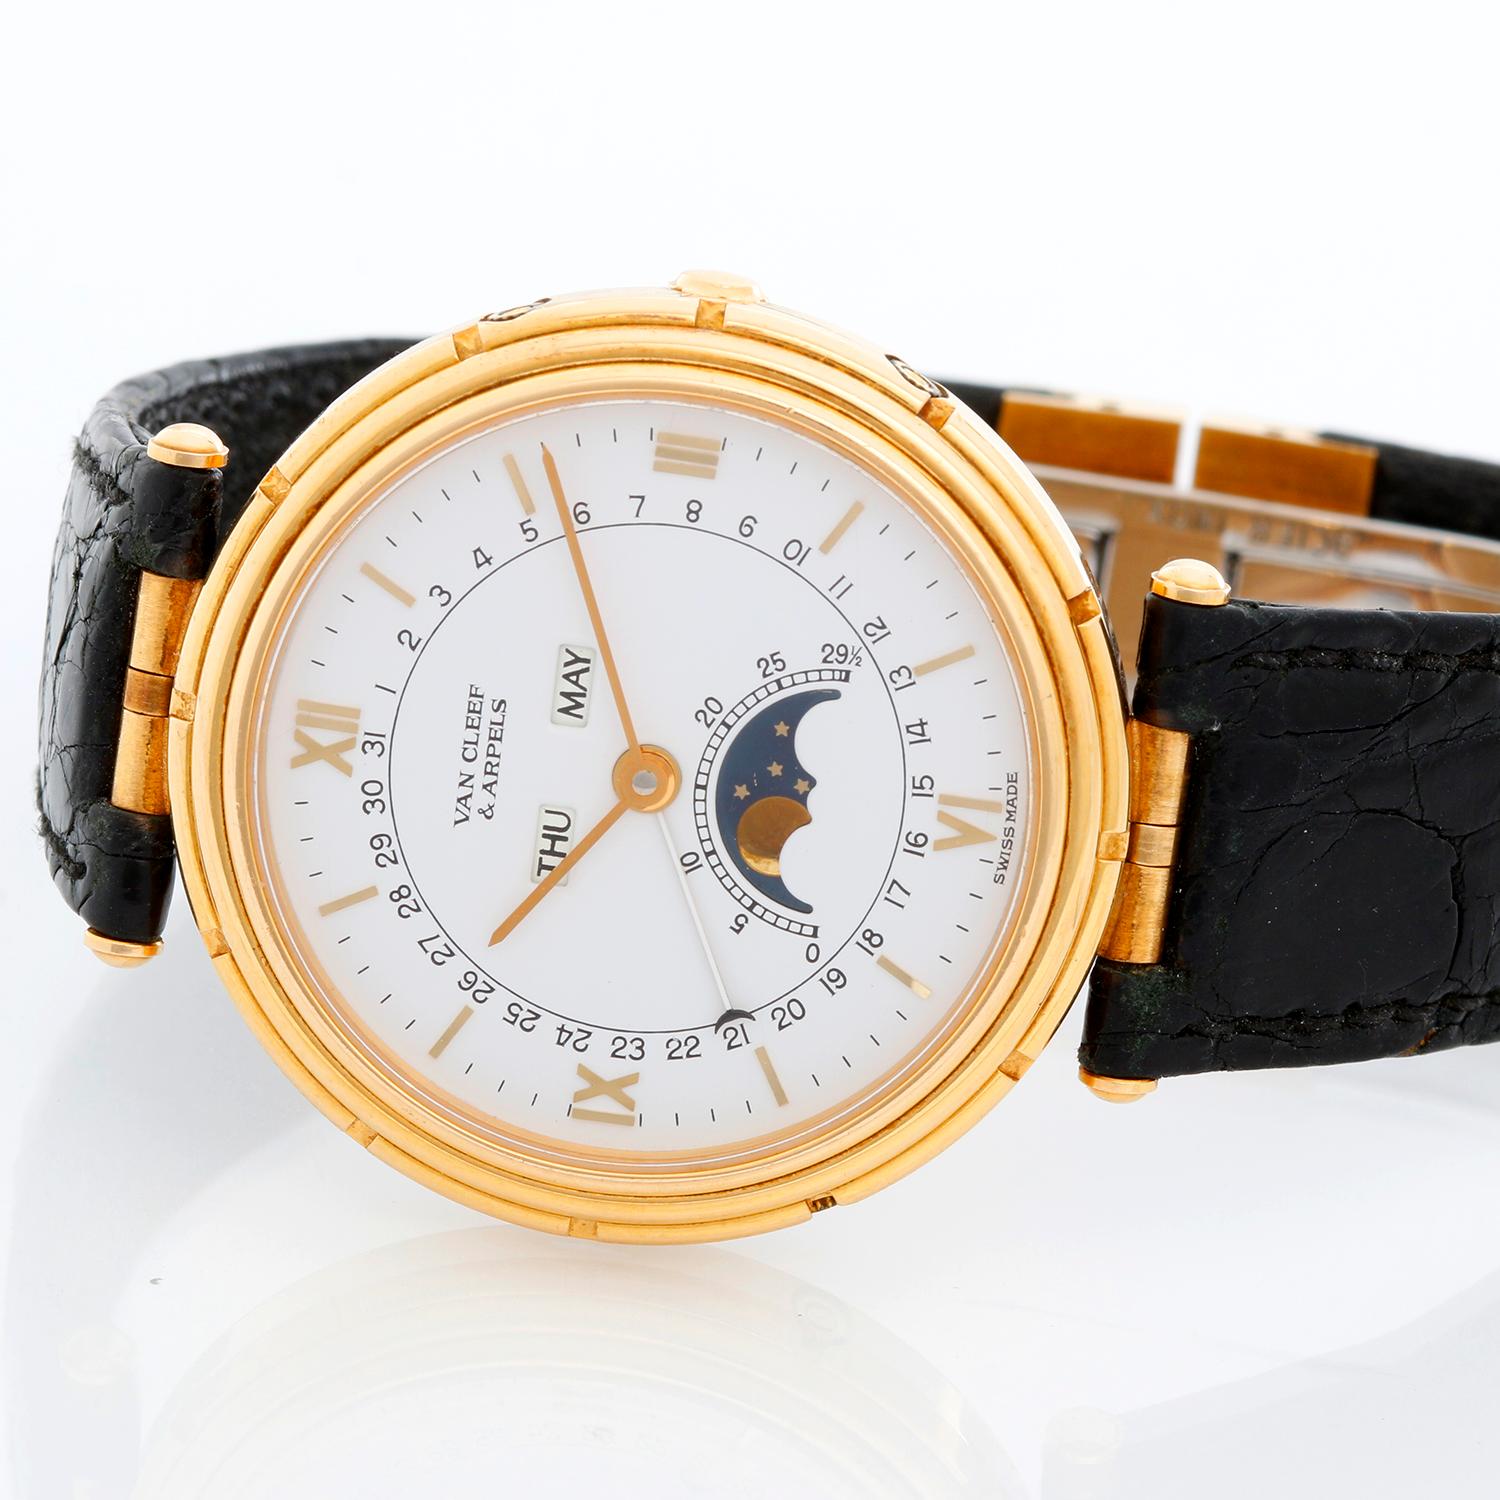 Van Cleef & Arpels 18K Yellow Gold La Collection Ladies Watch - Quartz. 18K Yellow gold ( 35 mm ). White dial with stick hour markers and Roman numerals ; Moonphase and Calendar. Black alligator strap with deployant buckle. Pre-owned with Van Cleef